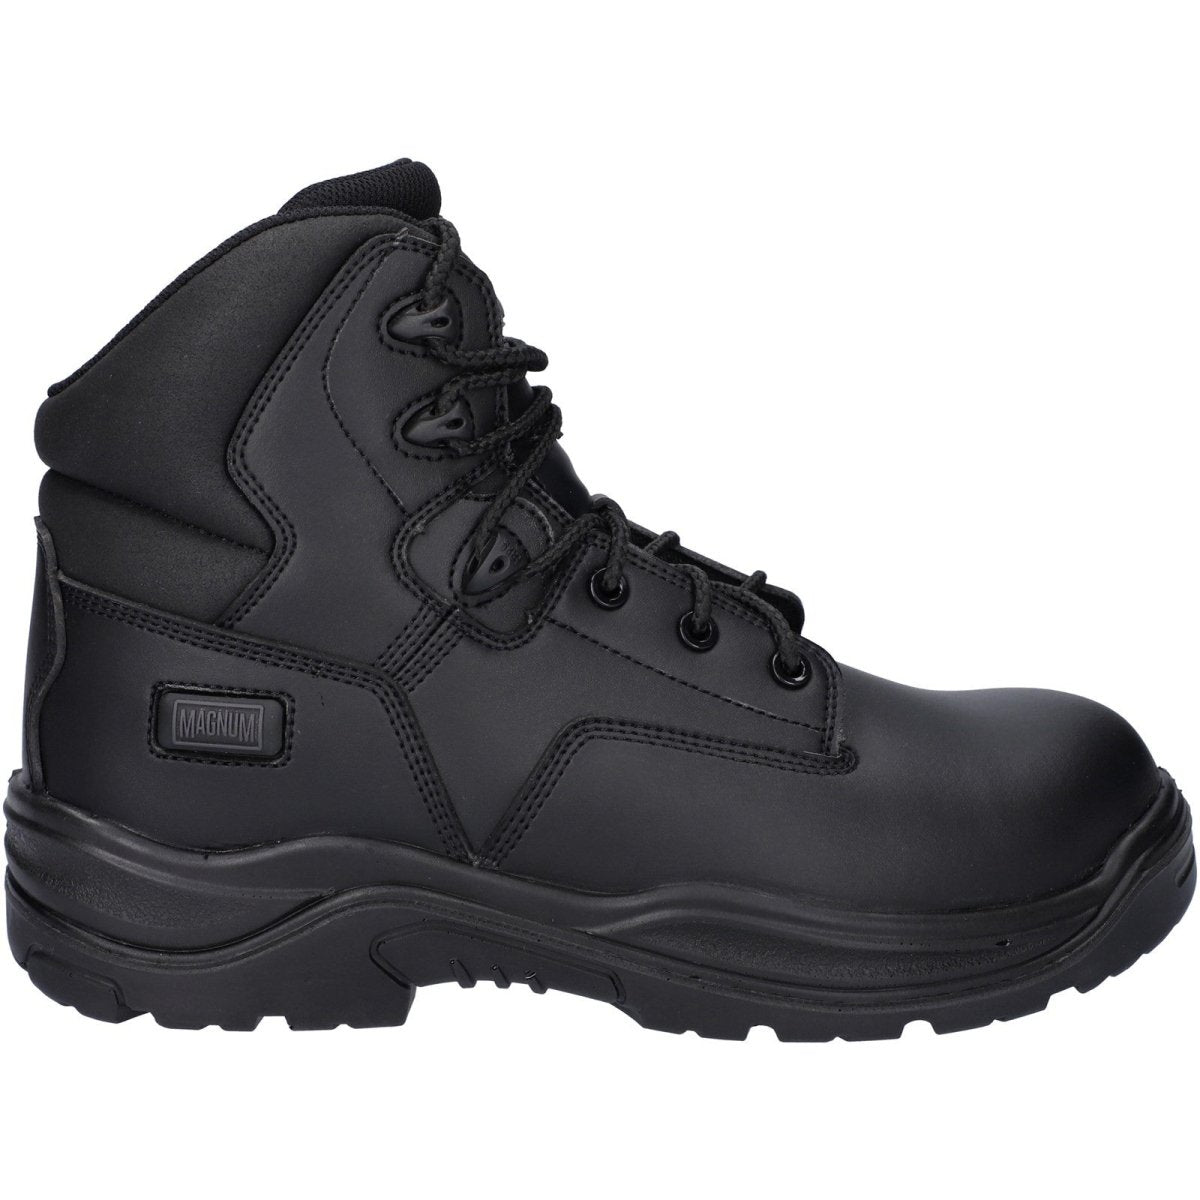 Magnum Precision Sitemaster S3 Waterproof Uniform Safety Boots - Shoe Store Direct